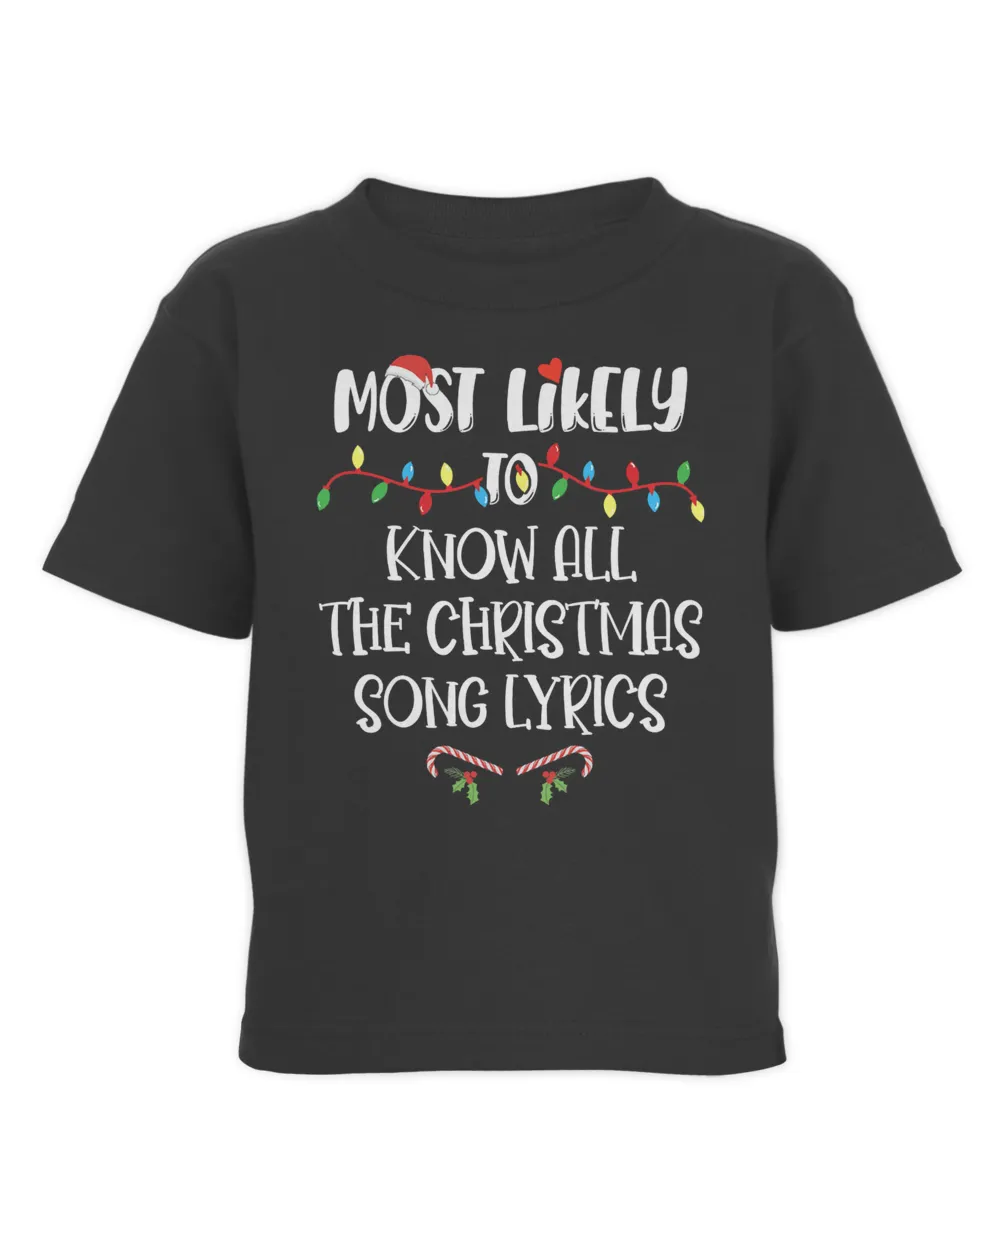 Most Likely To Christmas Know All The Christmas Song Lyrics T-Shirt